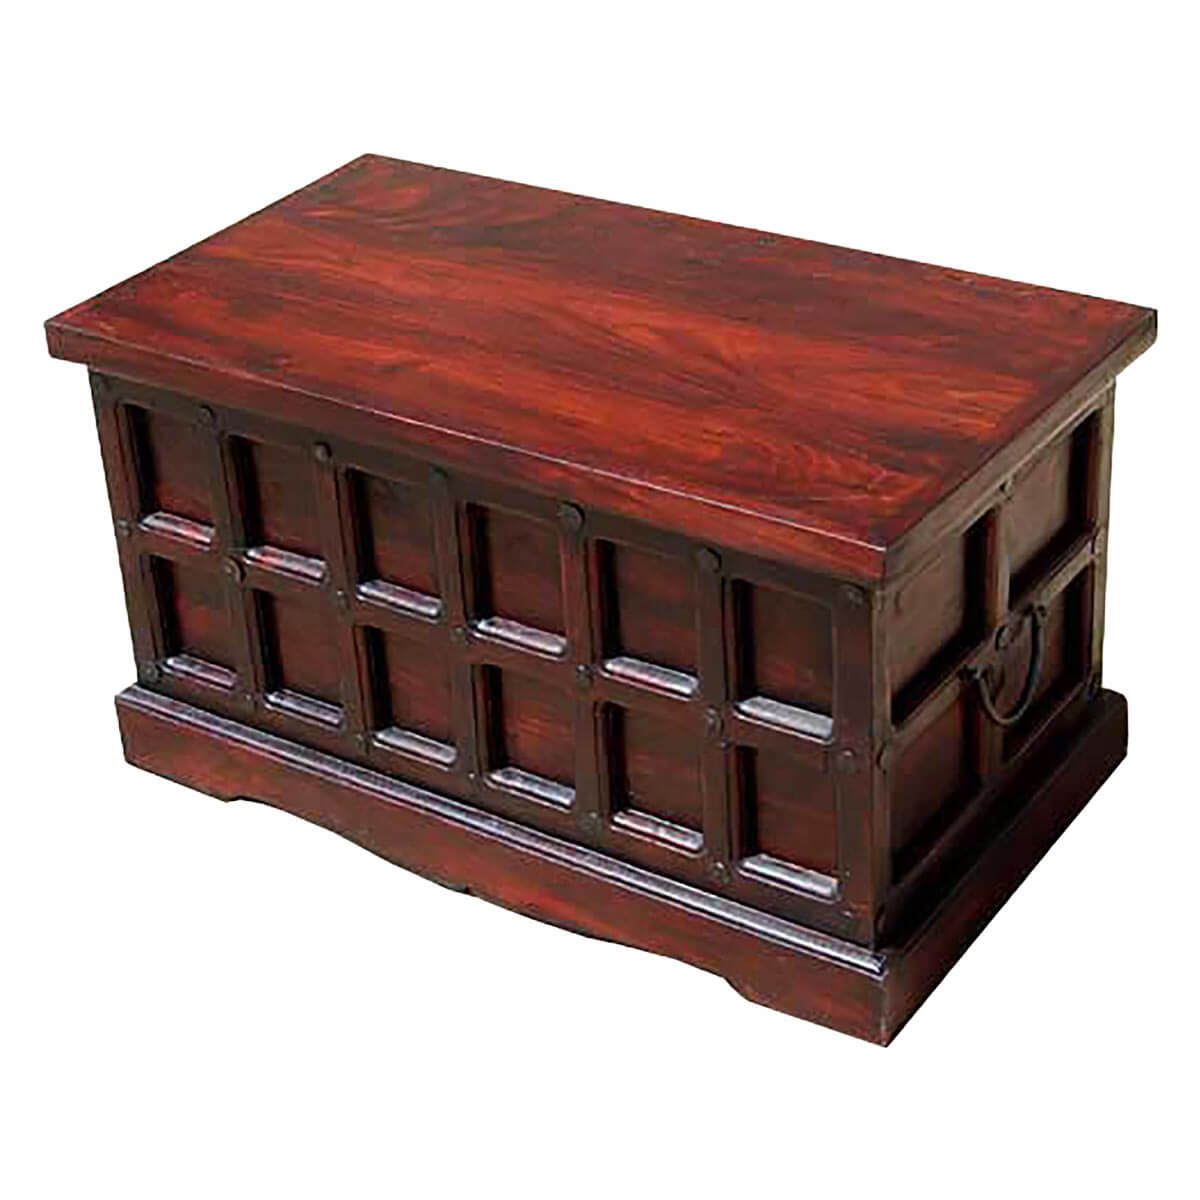 Beaufort Solid Wood Storage Chest Trunk Box Coffee Table In Walnut Wood Storage Trunk Console Tables (View 18 of 20)